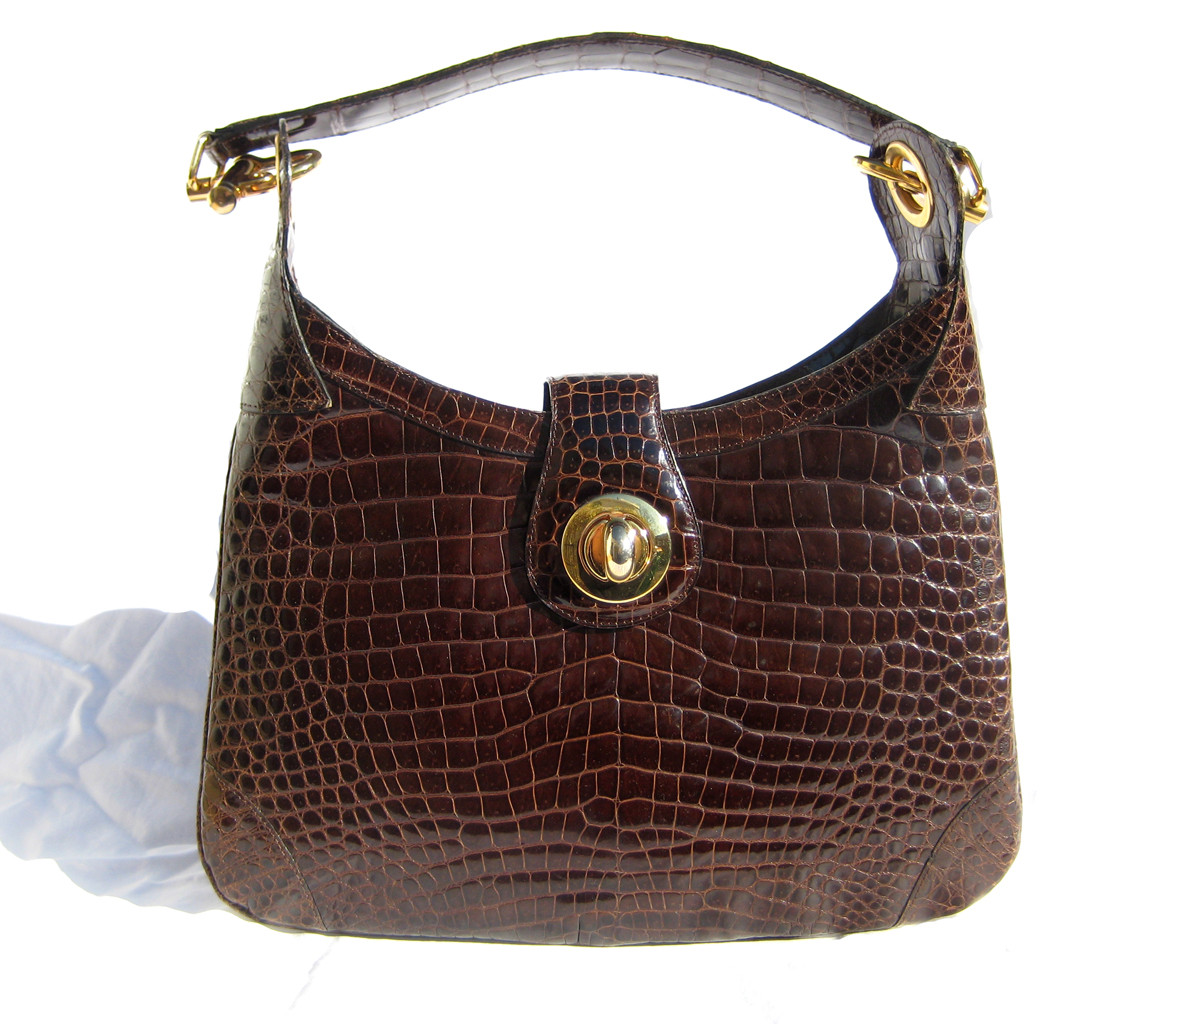 LOUIS FONTAINE Leather Small Handbag - Chocolate Color